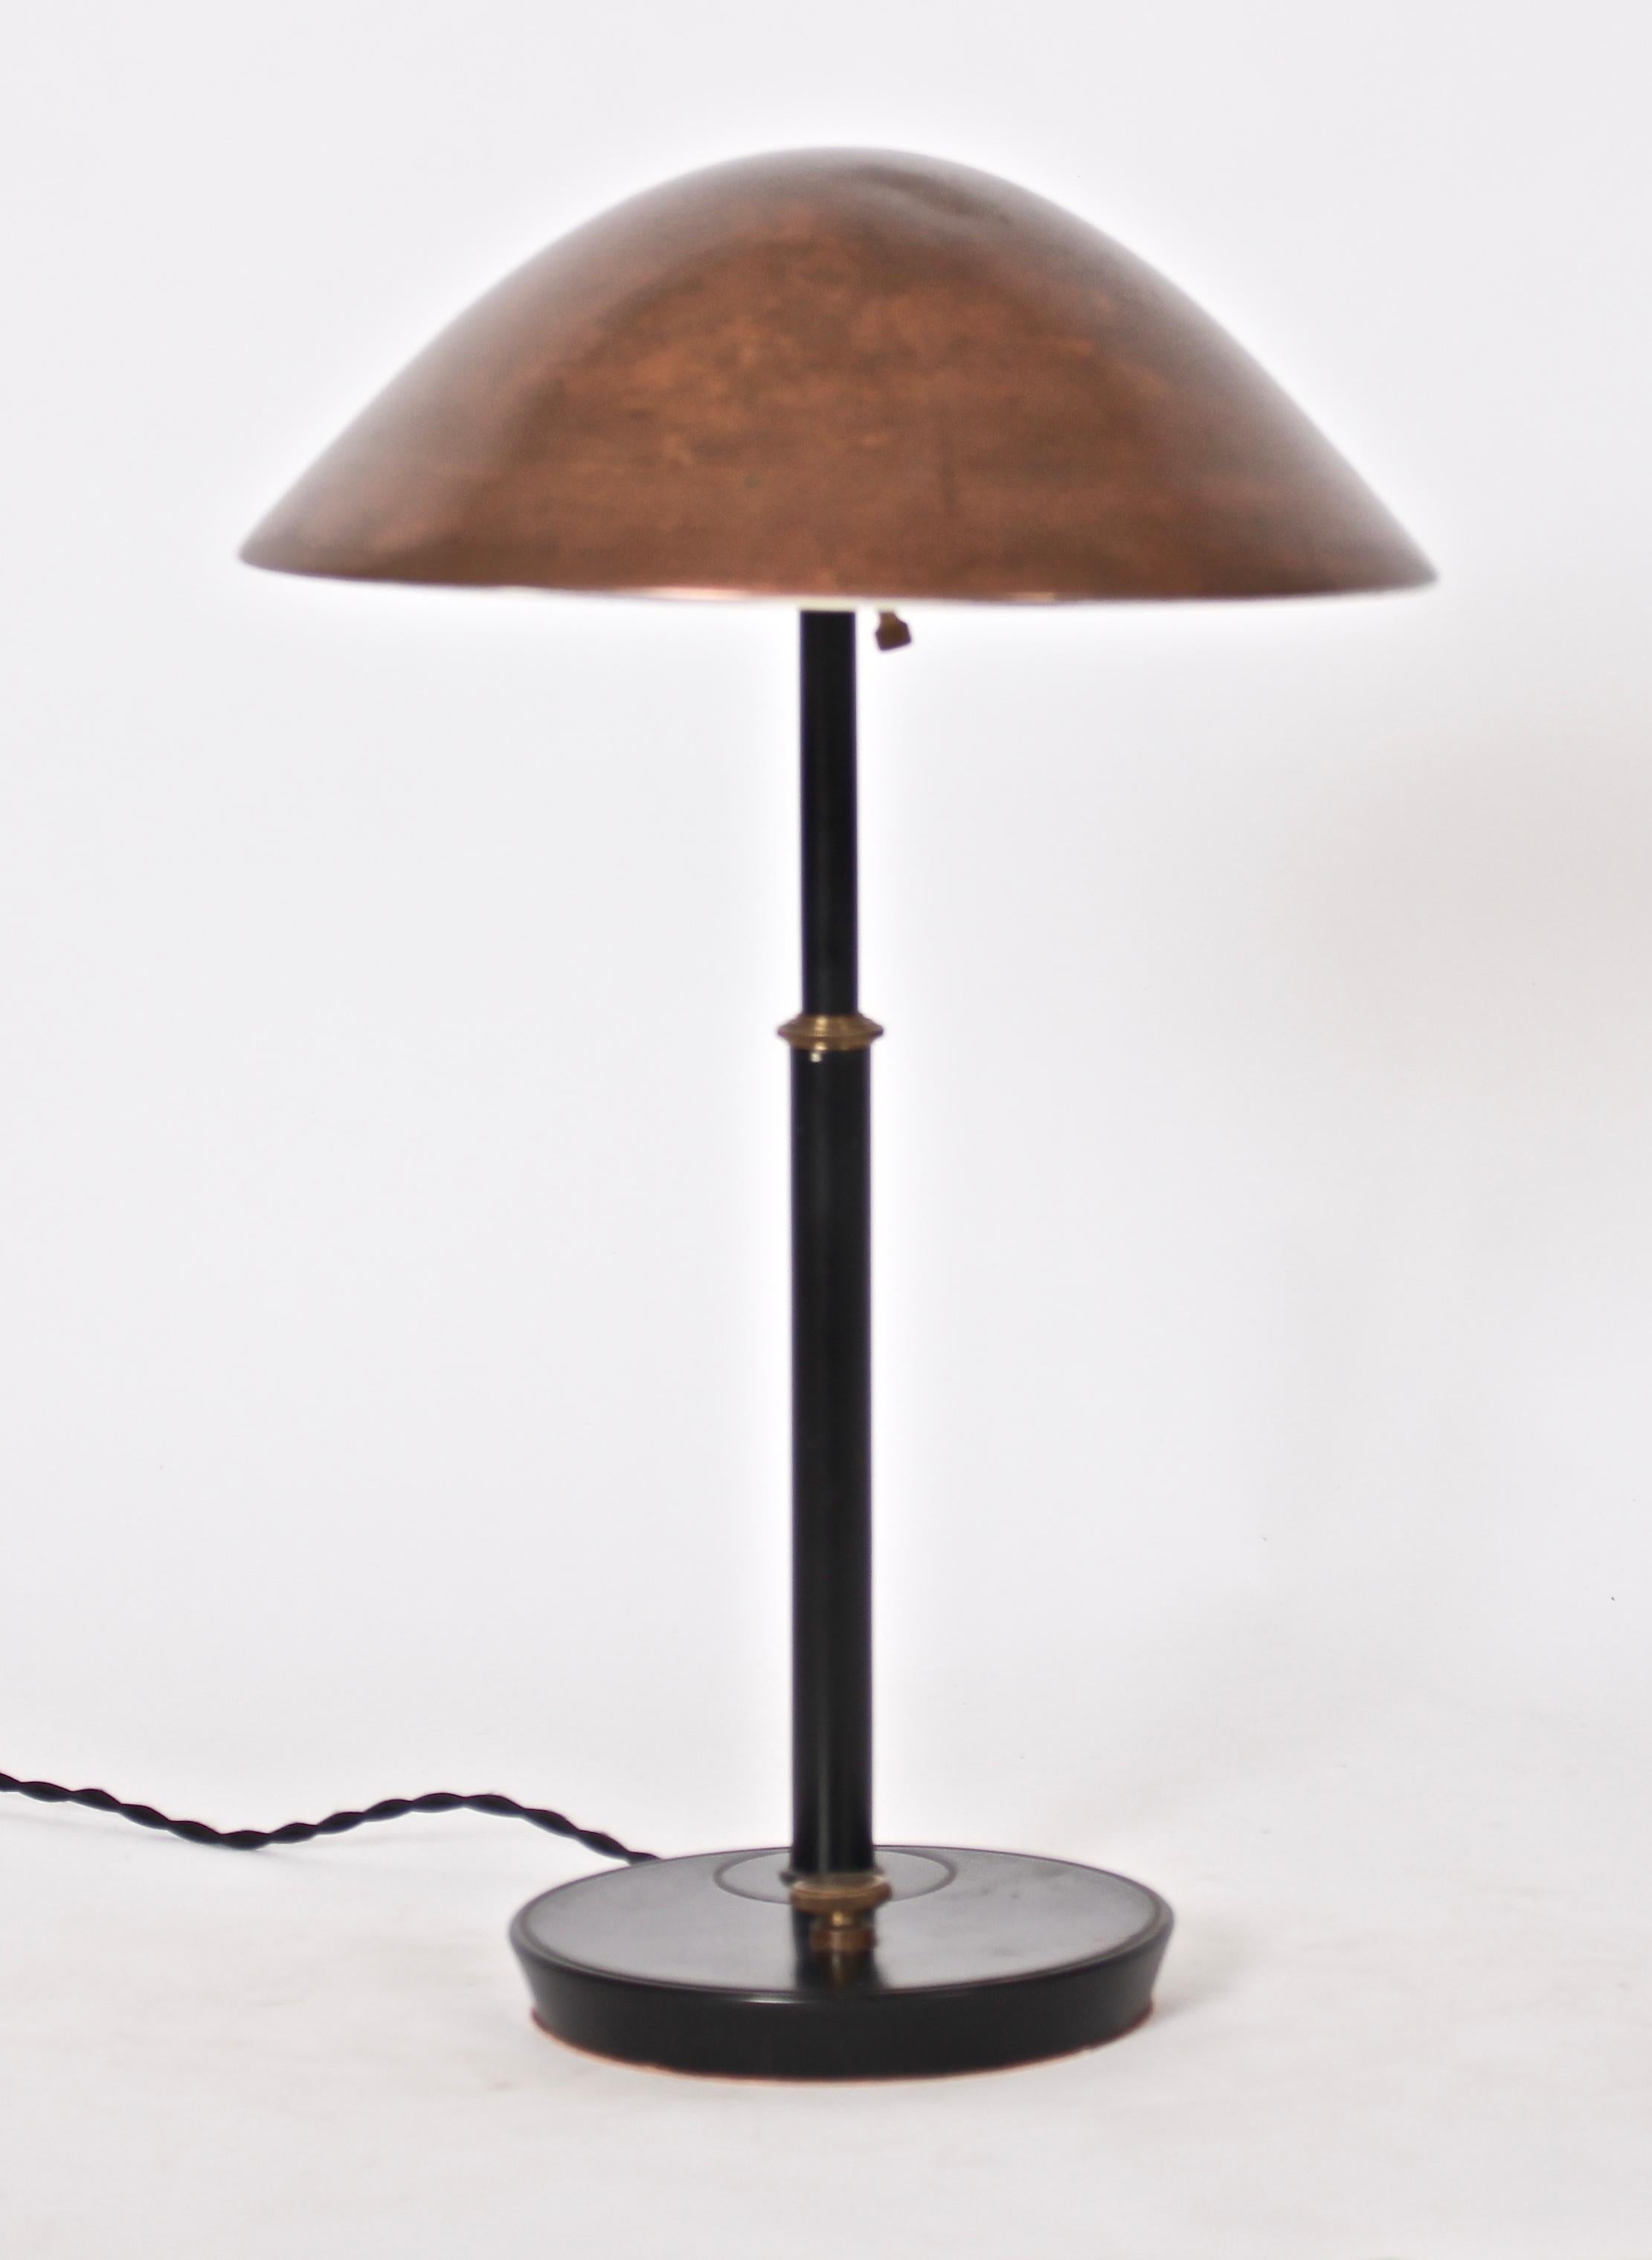 American Black Enameled Desk Lamp with Copper Shade, circa 1950